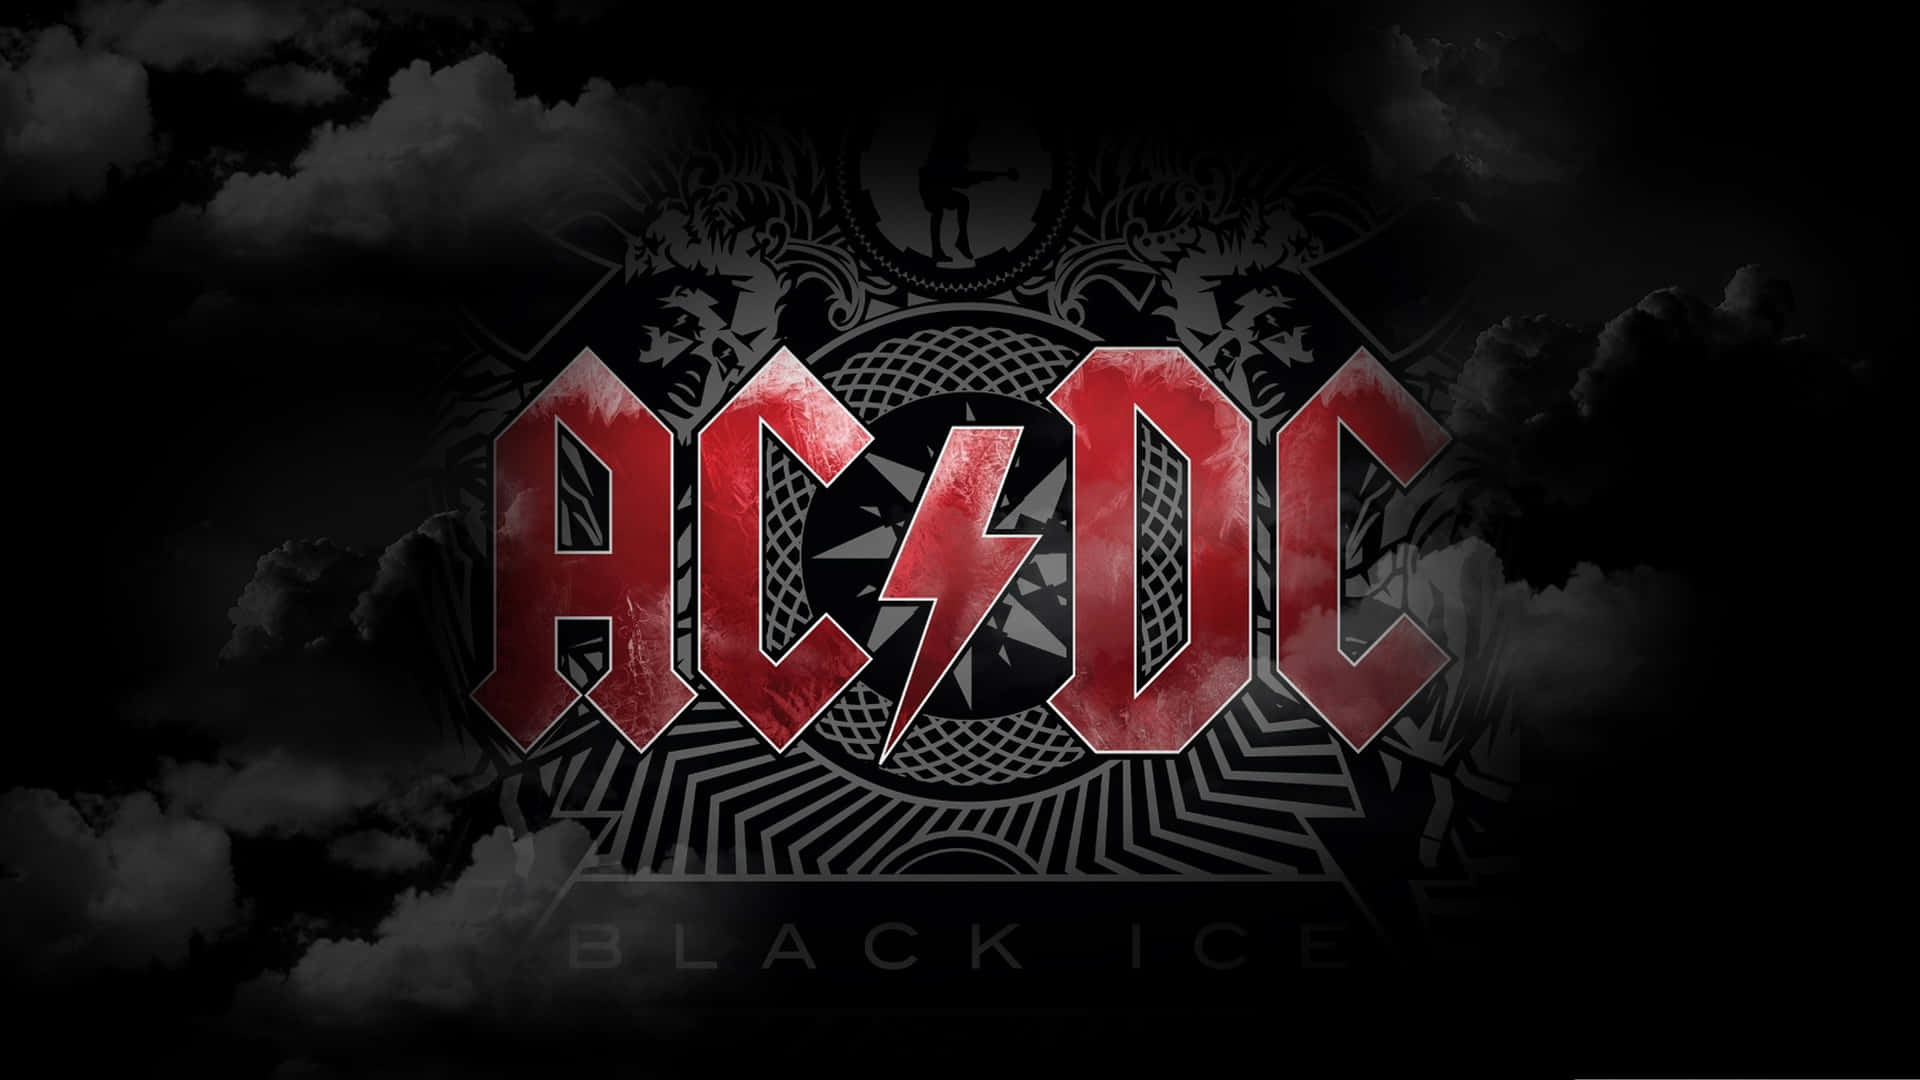 Rock Out With The Legends Of Ac/dc